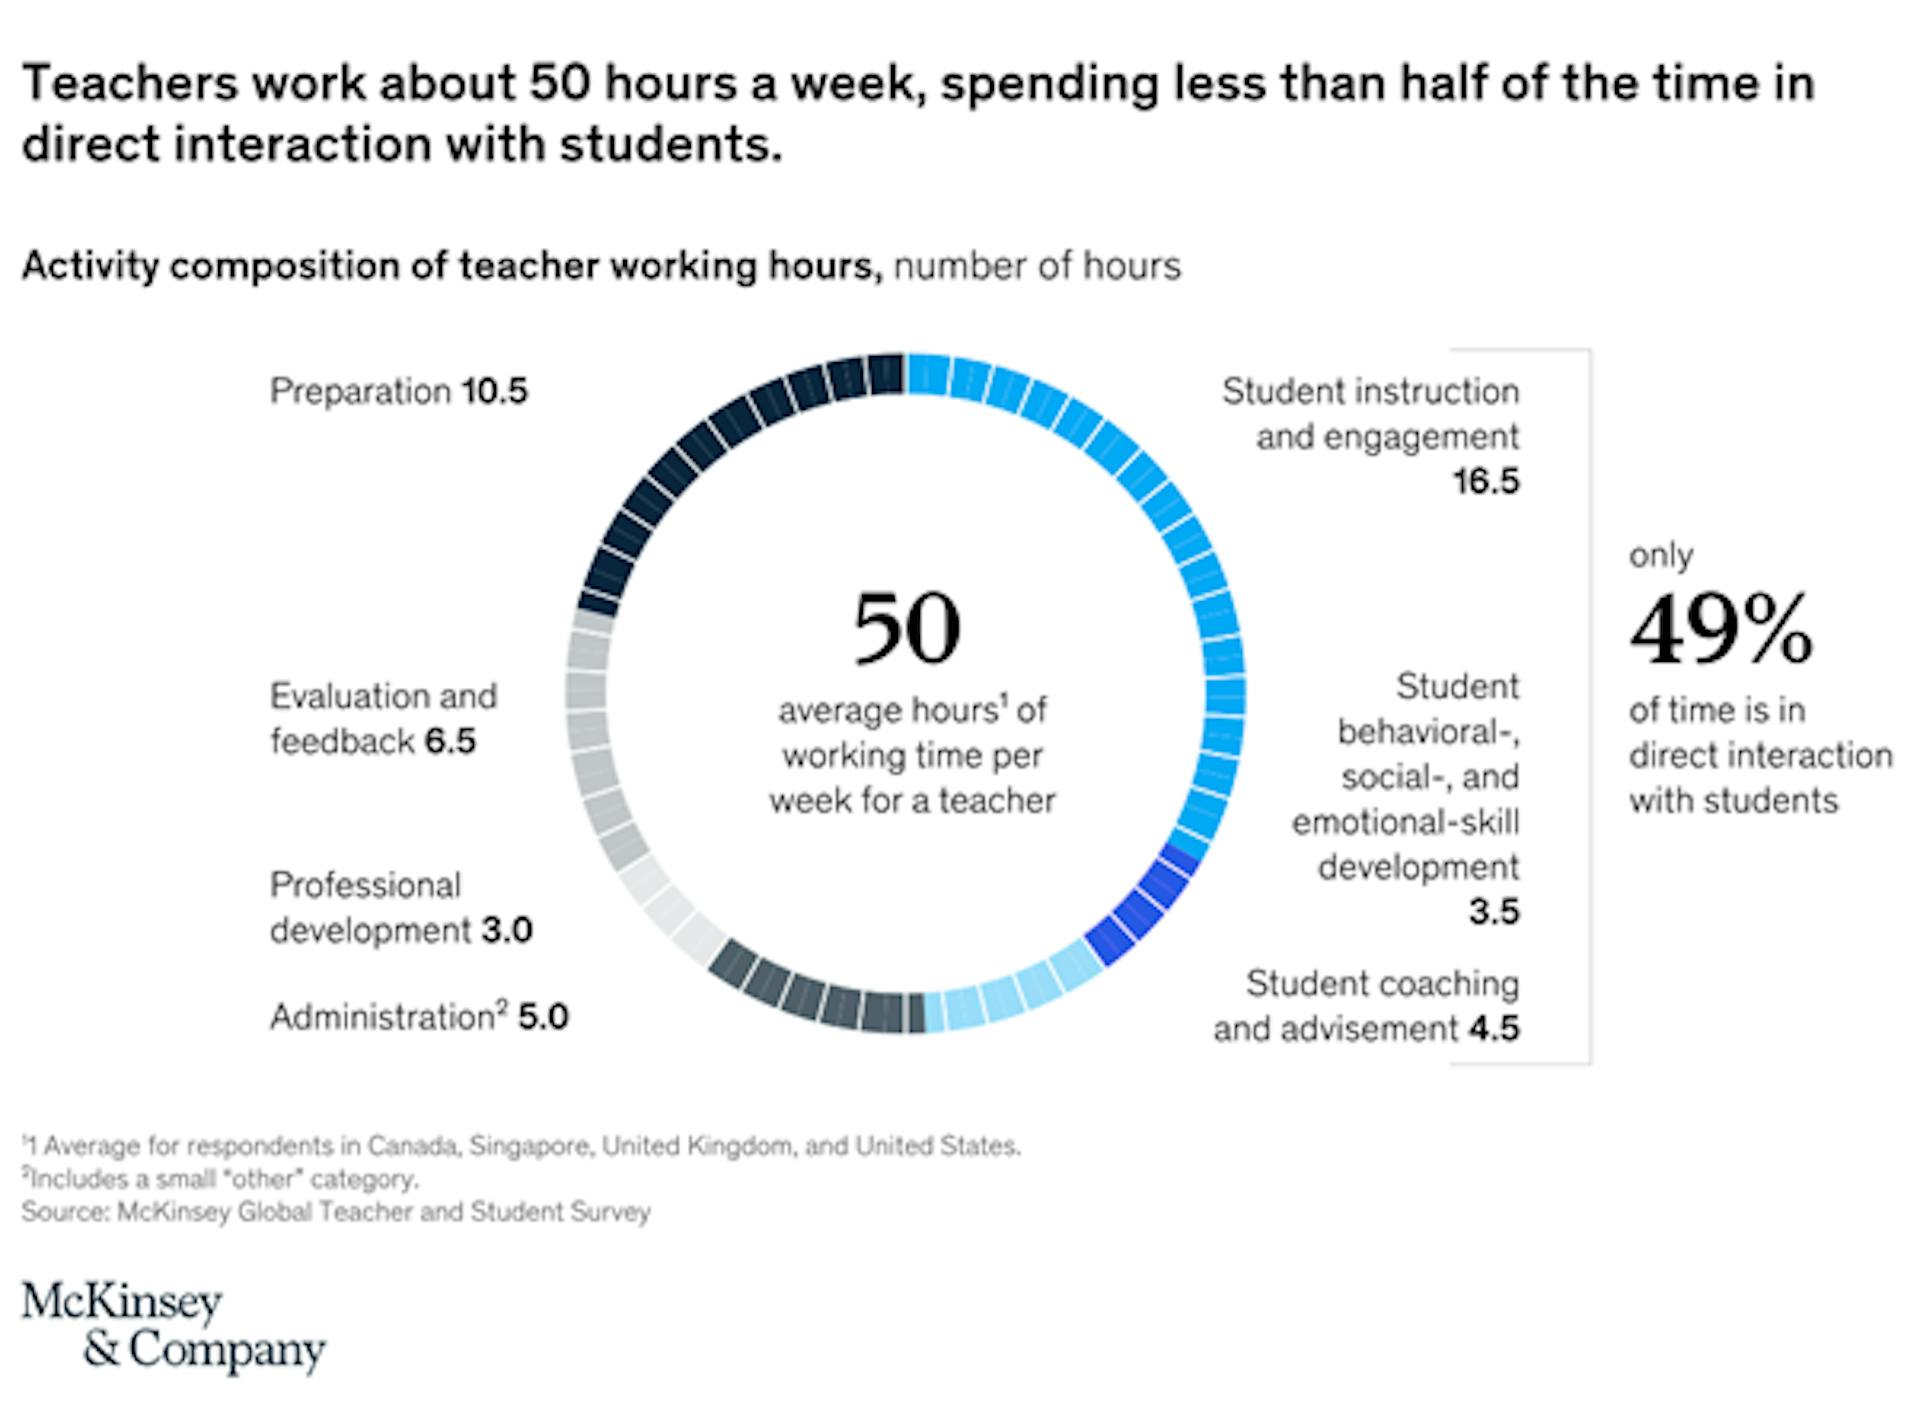 Activity composition of teacher working hours